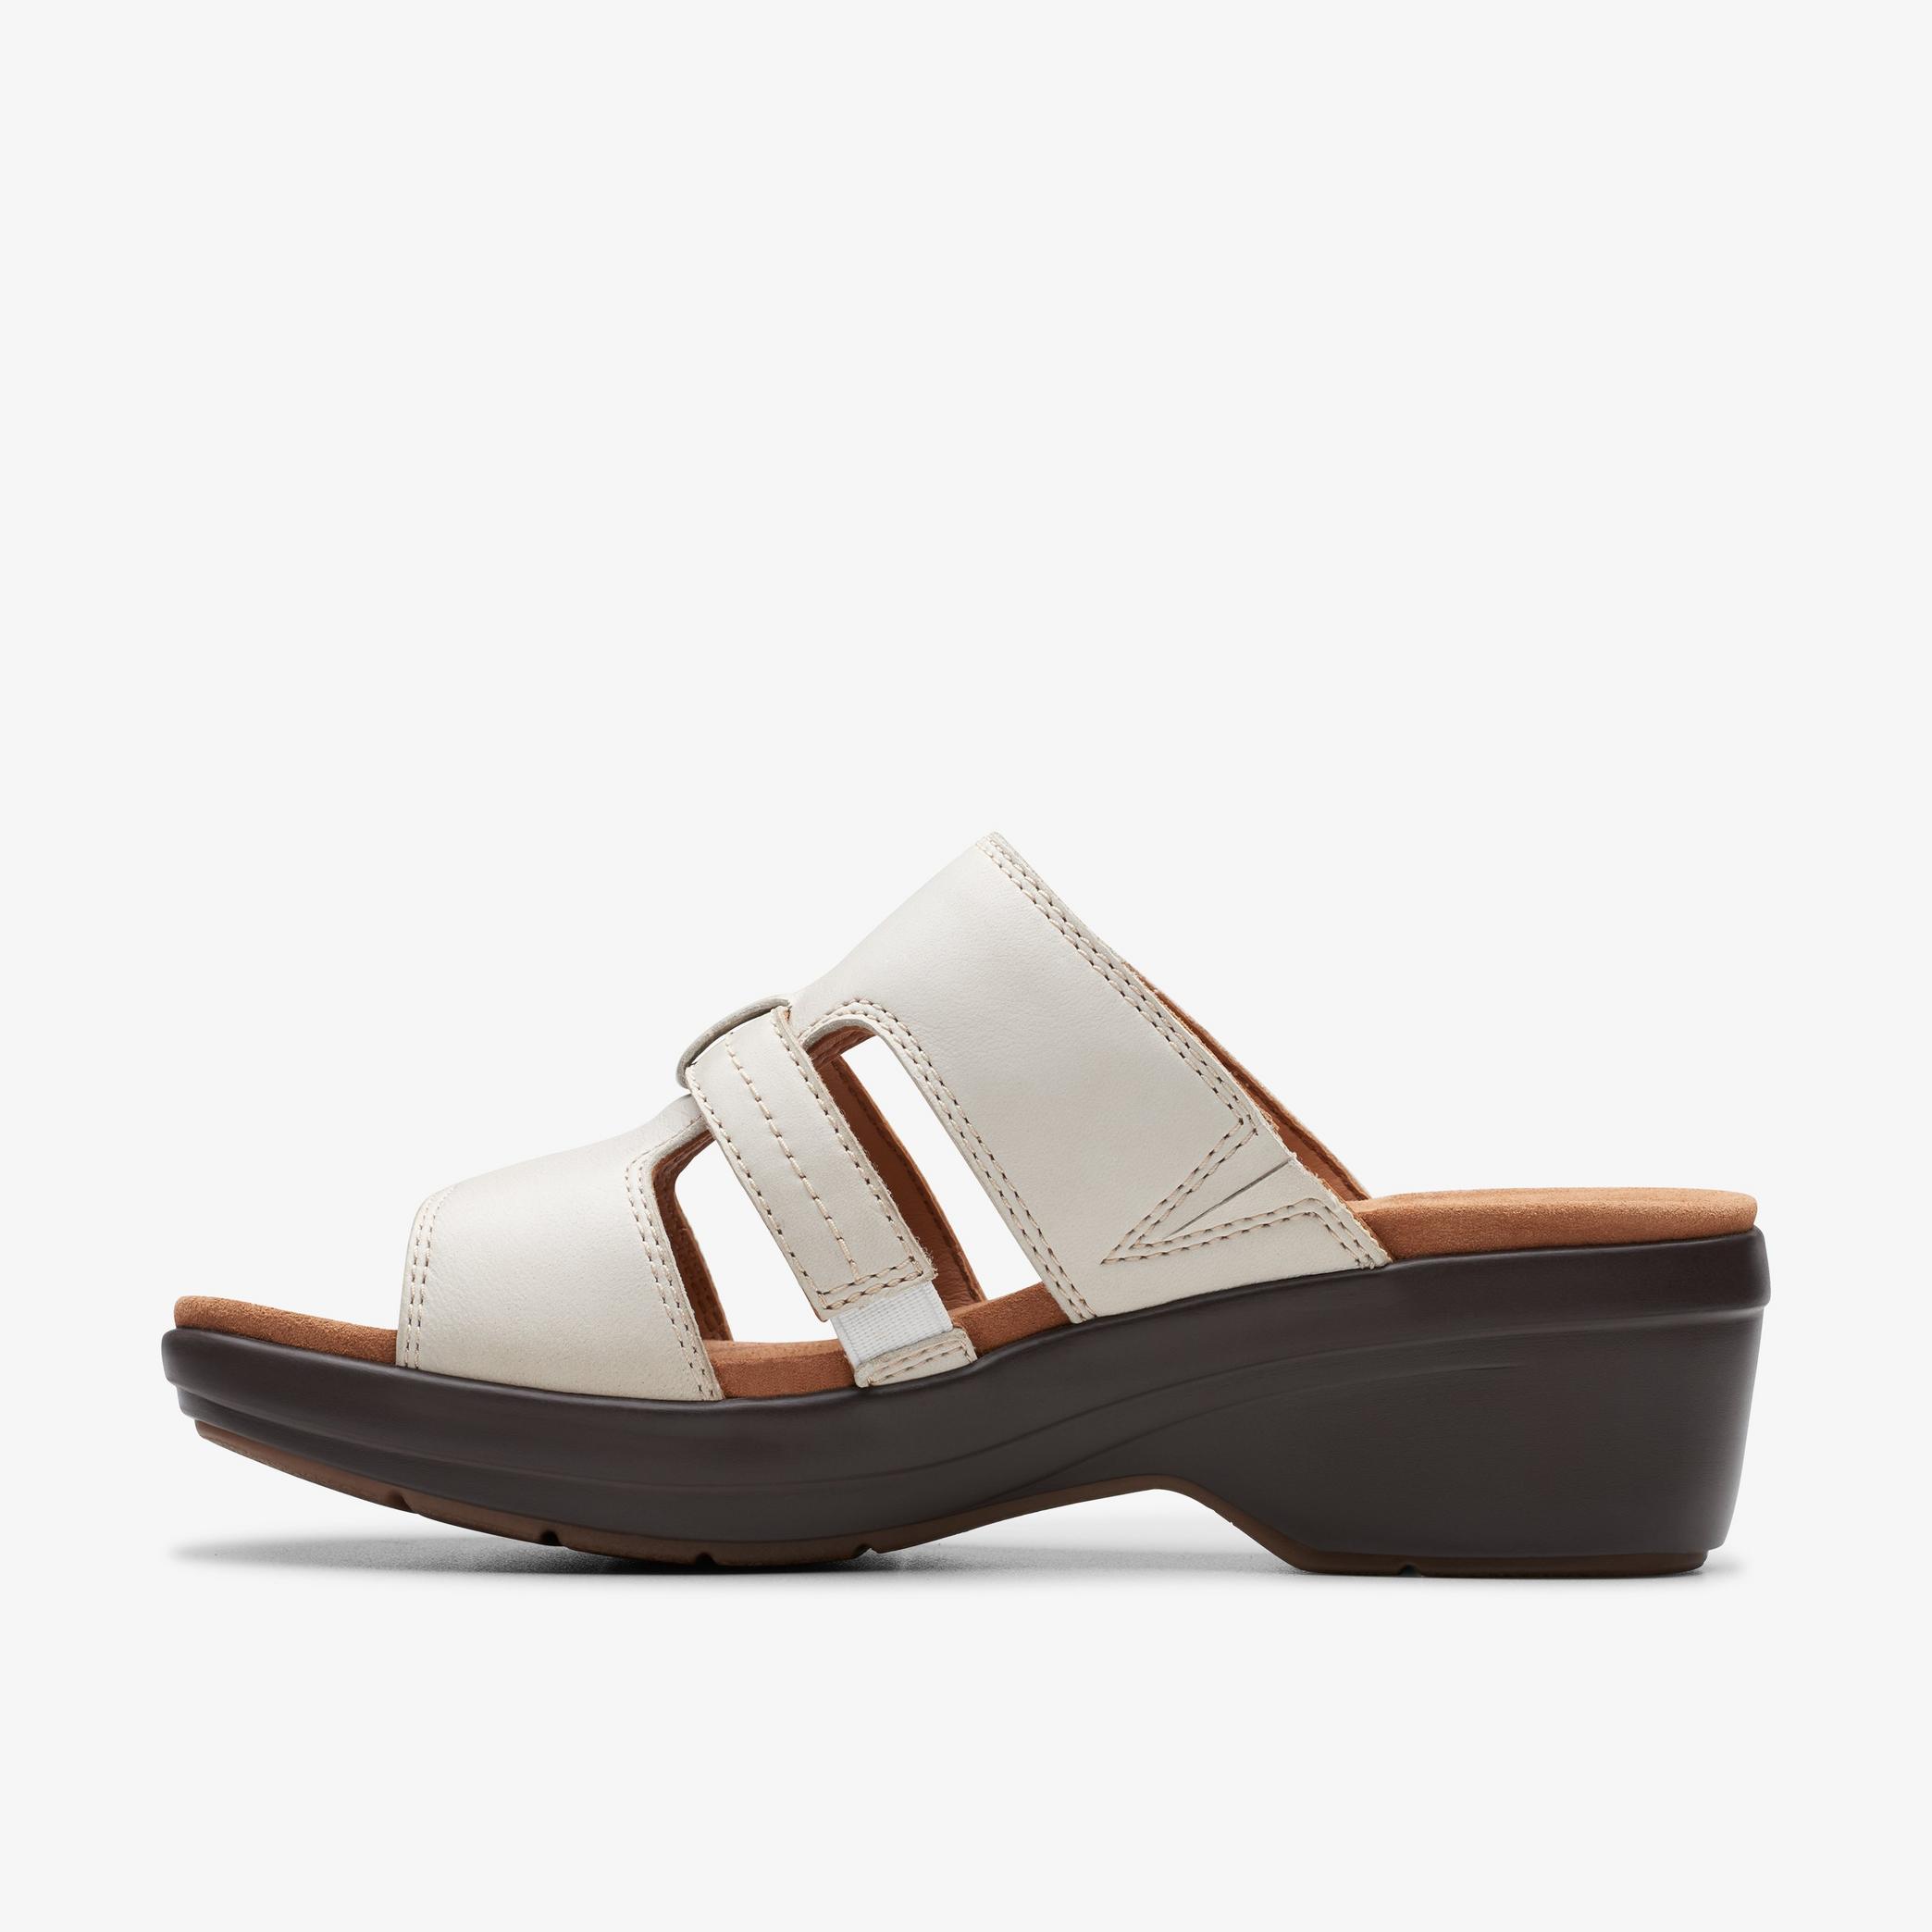 Tuleah Jane Off White Leather Wedges, view 2 of 6